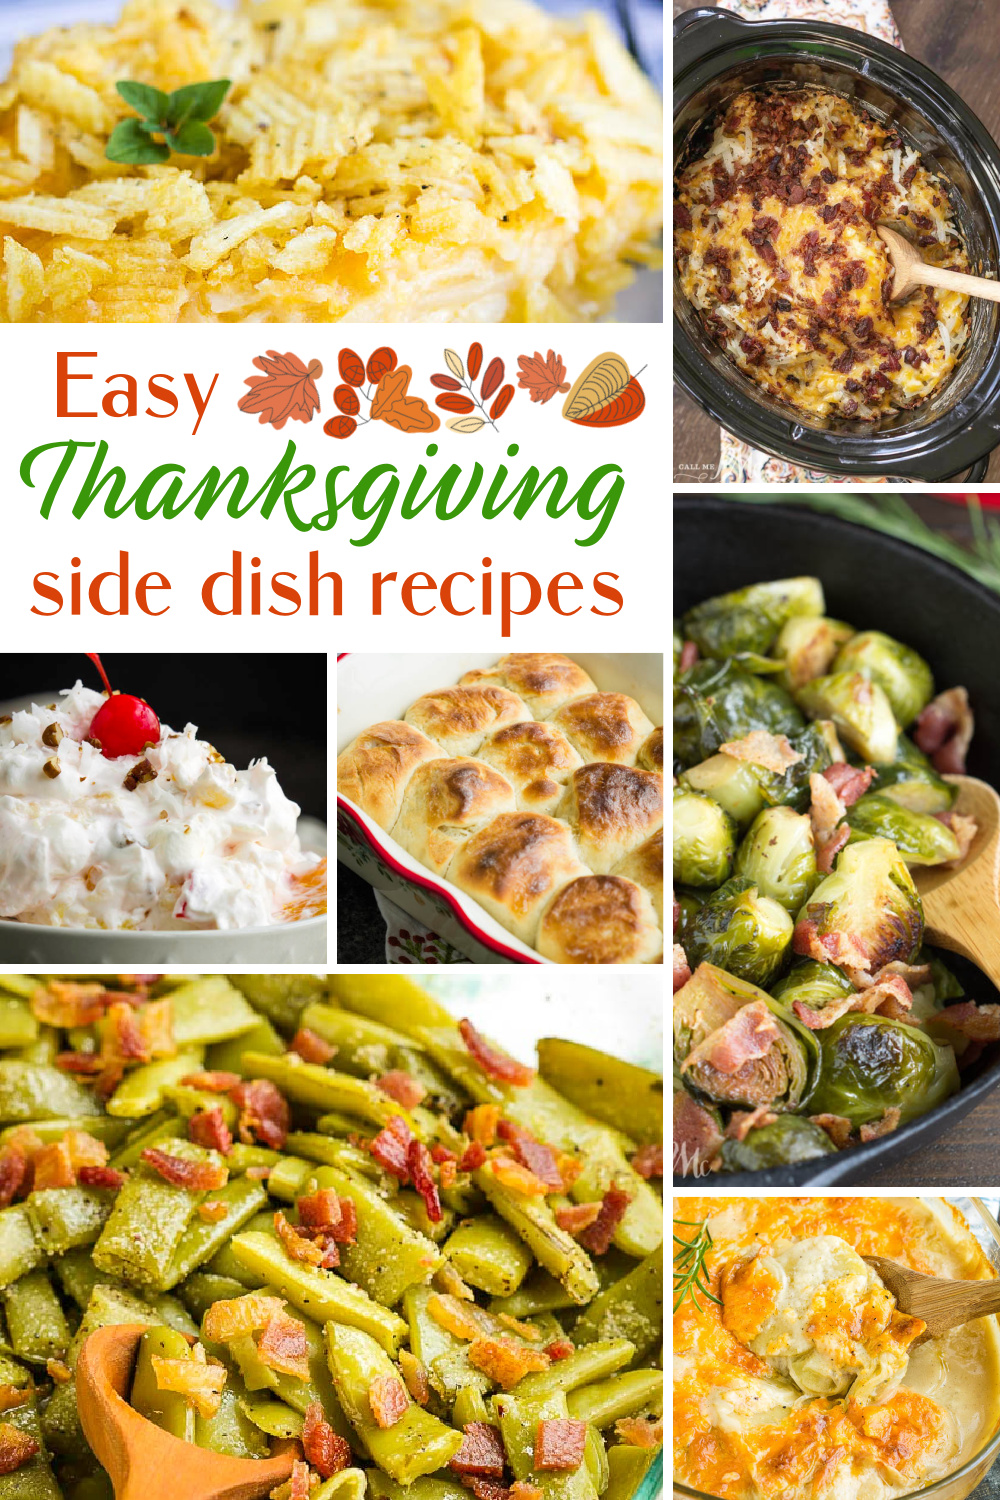 Best Holiday Side Dish Recipes a delicious roundup of holiday side dishes for the holidays that your family will love! #Thanksgiving #ThanksgivingDinner #ThanksgivingRecipes #Recipes #SideDish #sidedishes #vegetables #casseroles